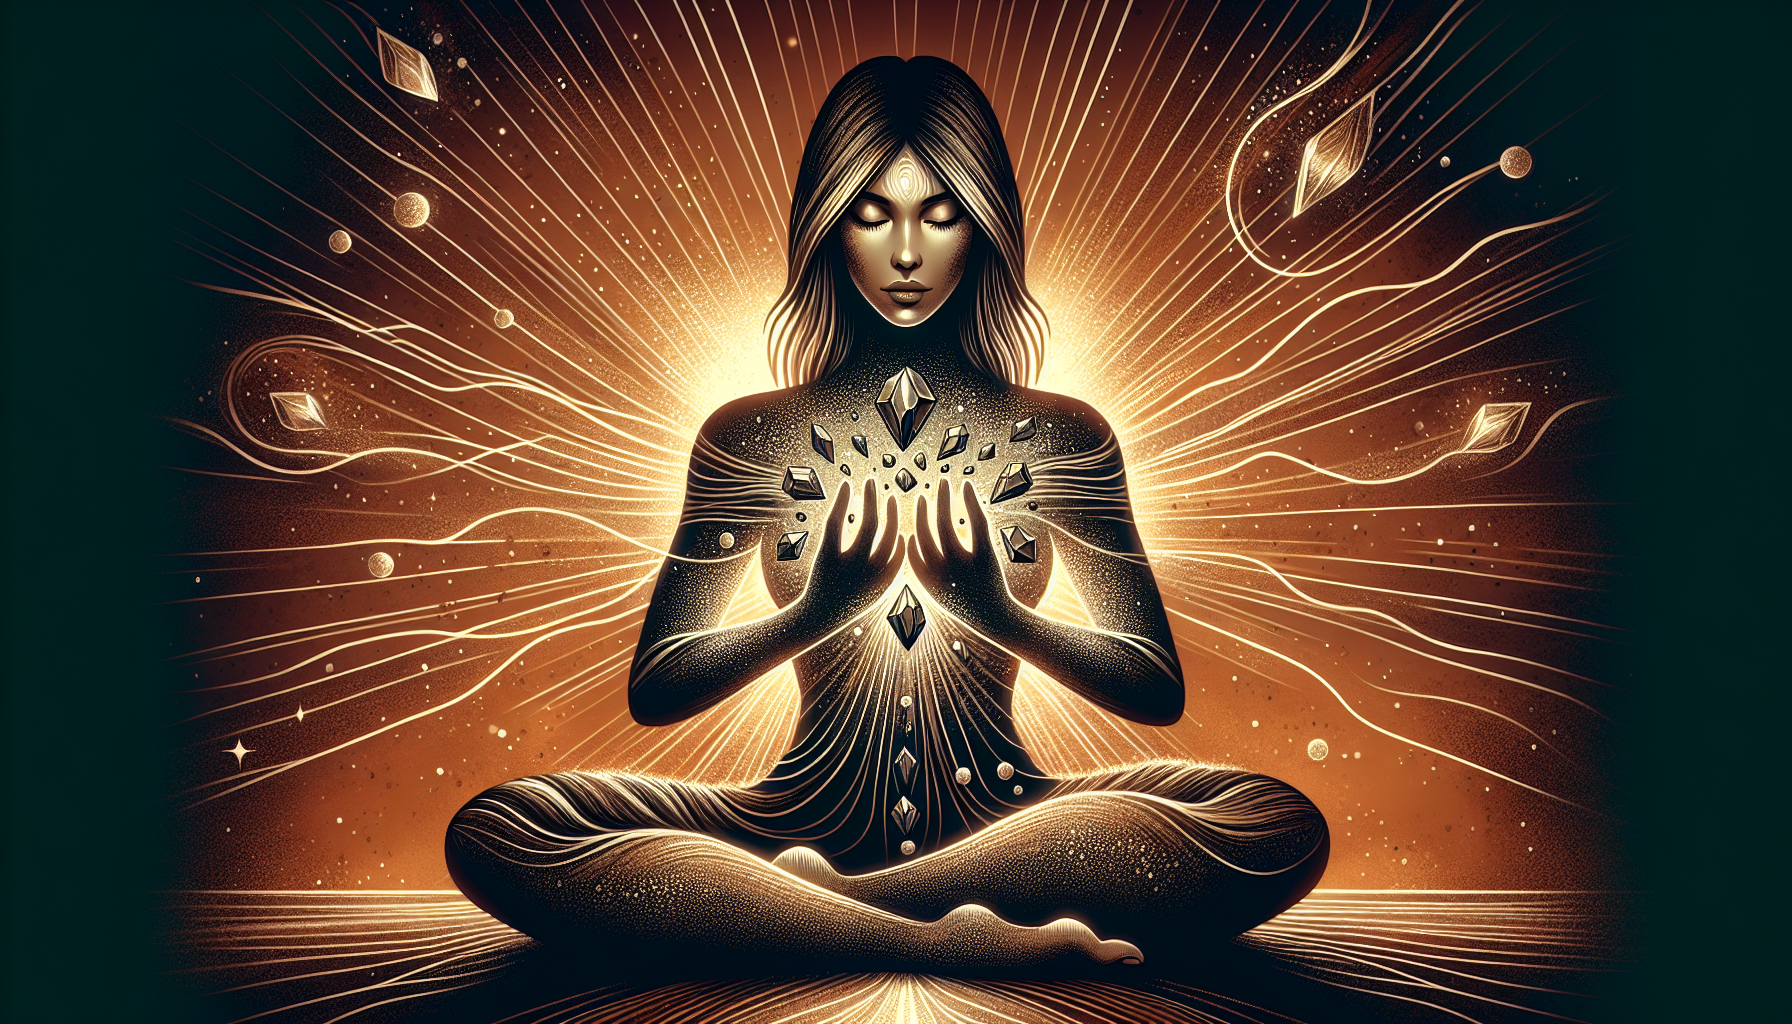 Illustration of a person meditating with hematite crystals